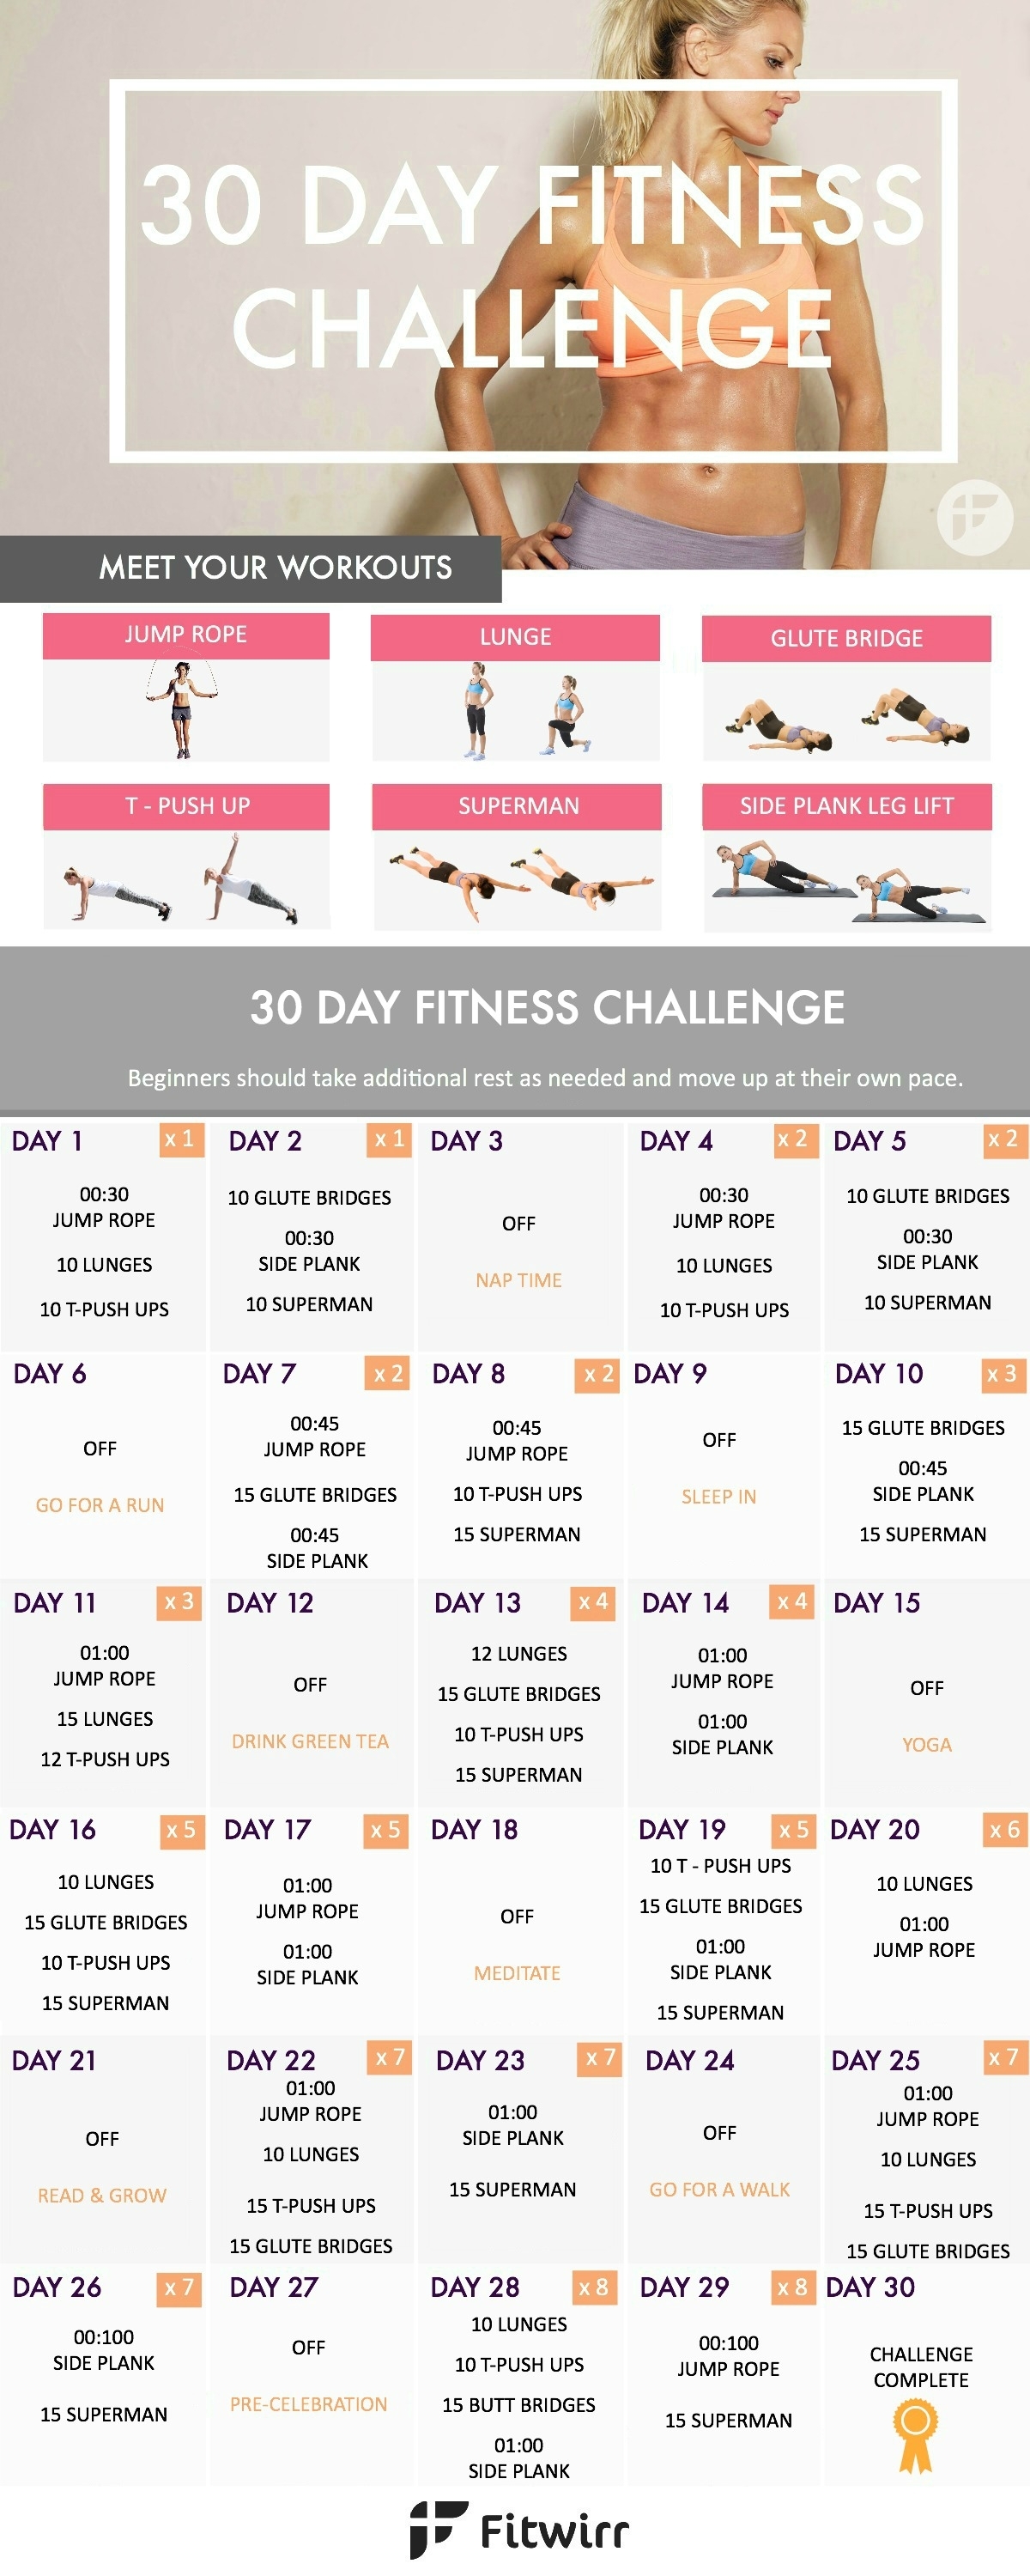 30 Day Fitness Challenge - Transform Your Body In 30 Days pertaining to 30 Day Fitness Challenges Printable Charts